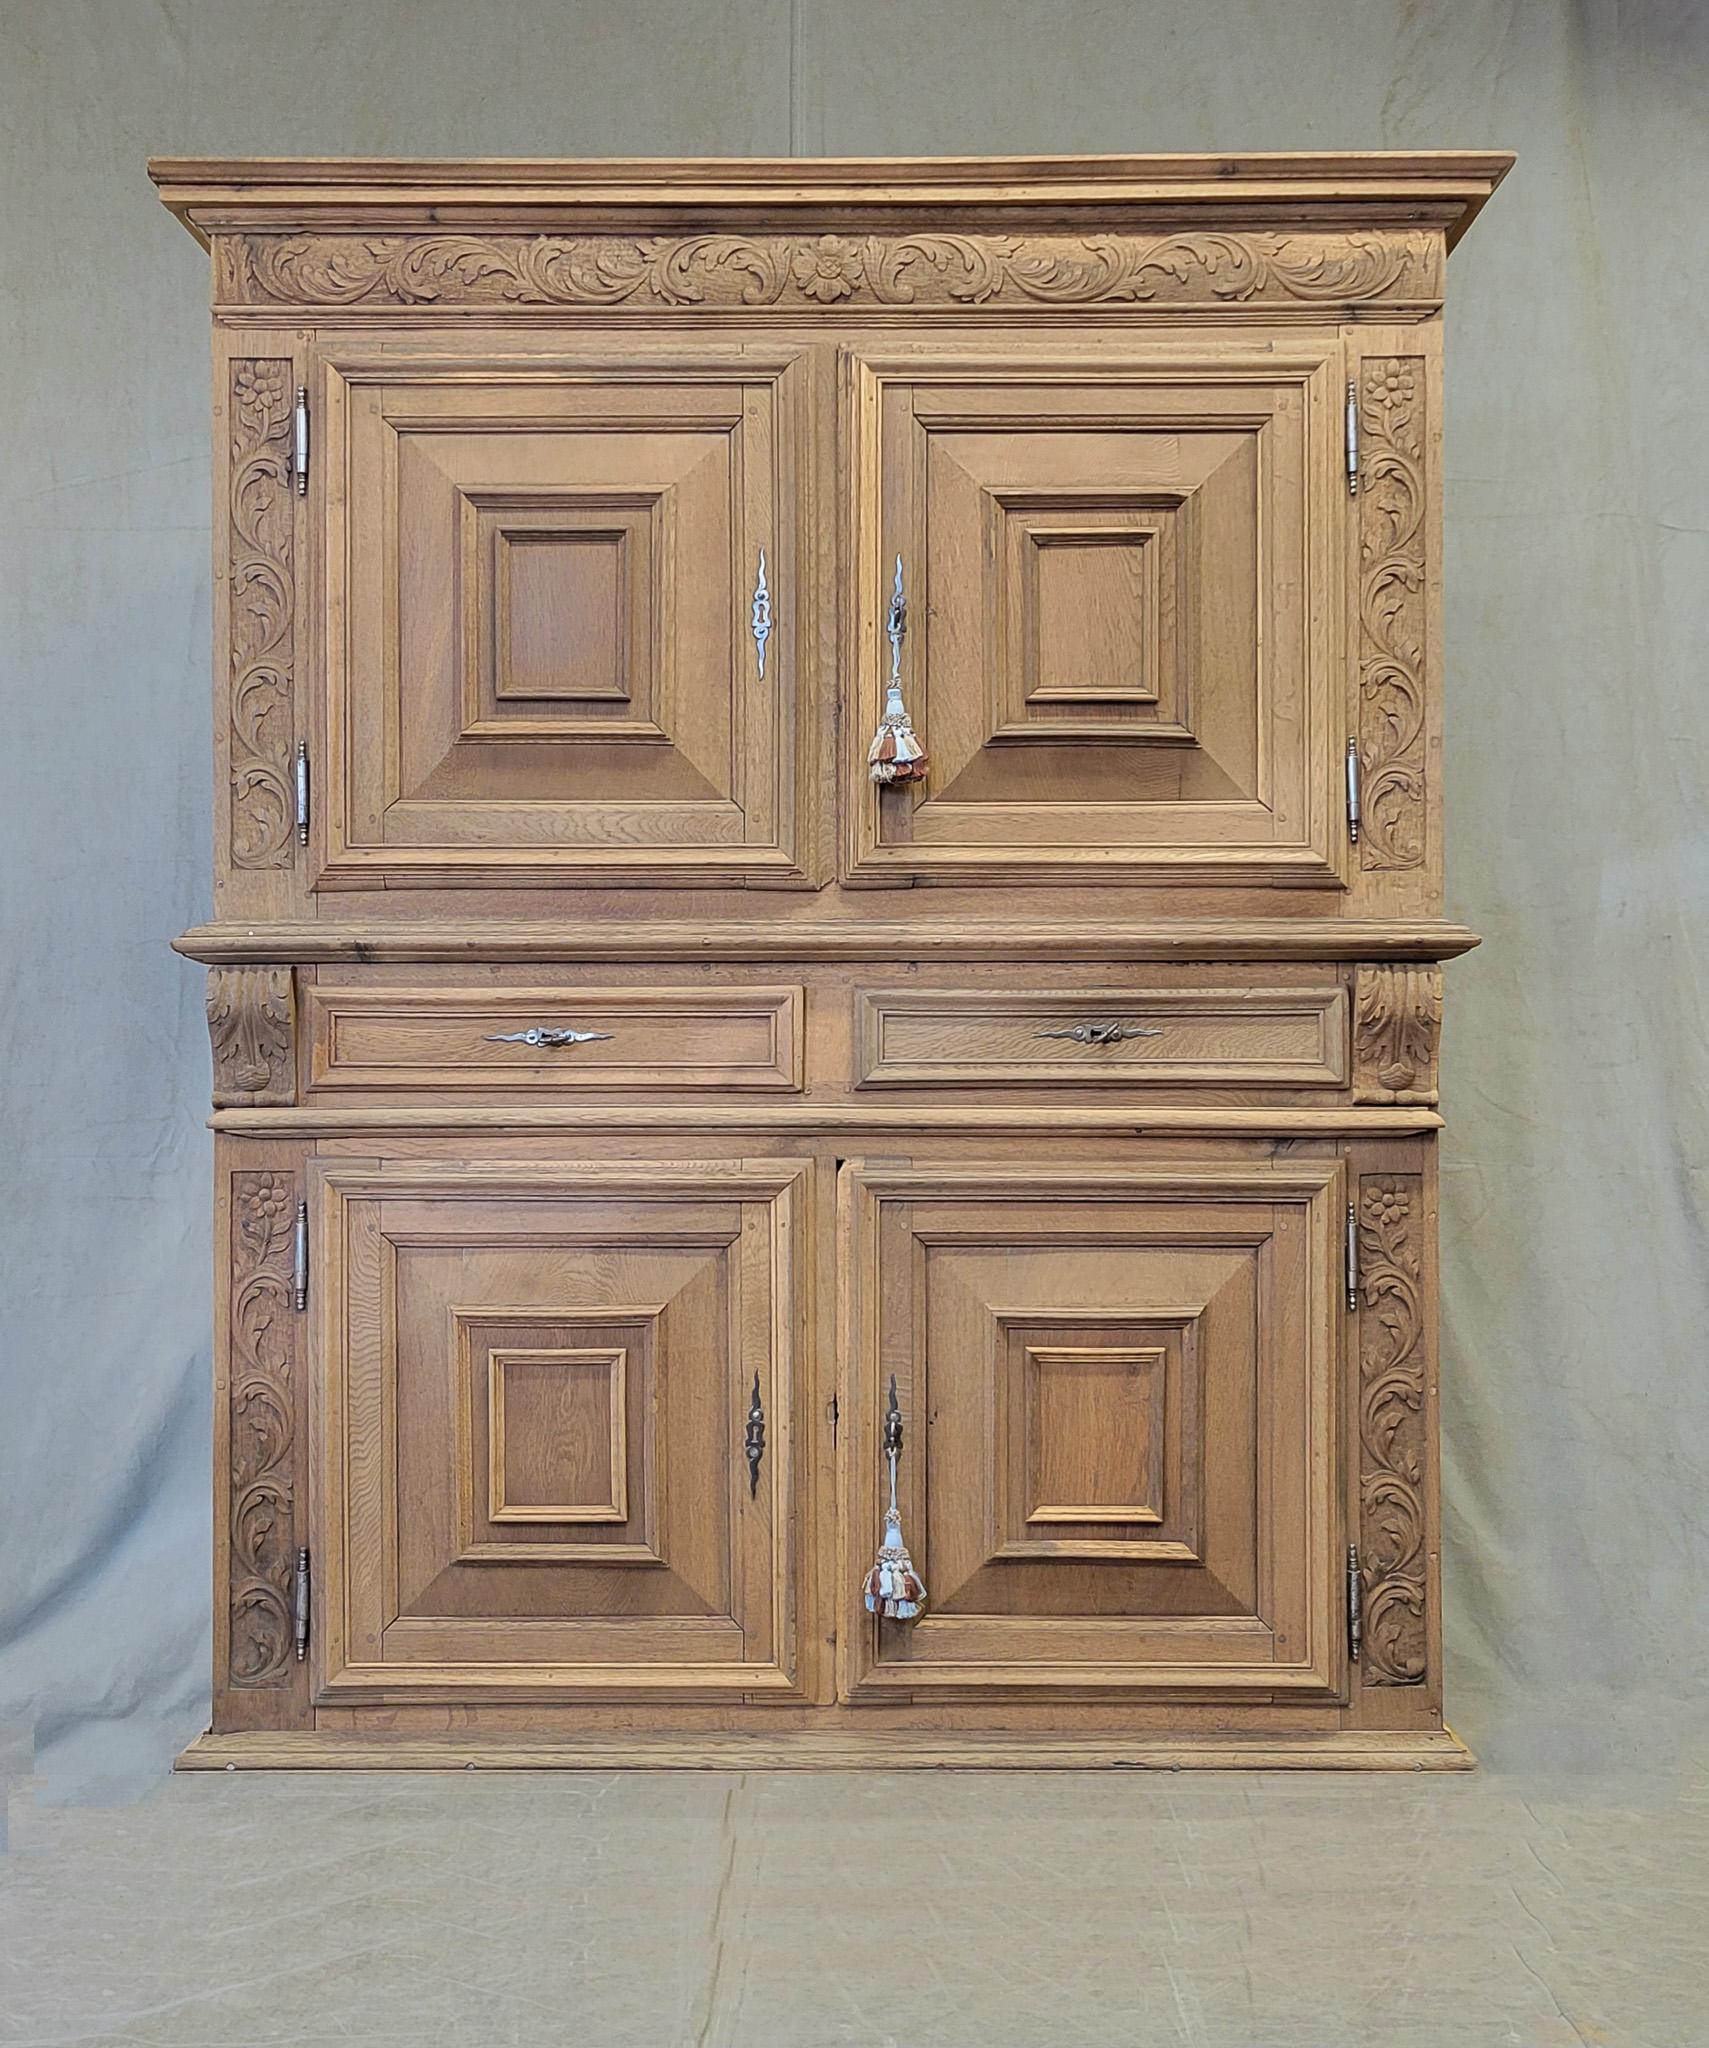 A beautiful antique early 1800s French carved oak and pine two piece cabinet that has been bleached for a lighter, rustic European look. Large compartments with shelves for storage above and below with two drawers. All doors and drawers are